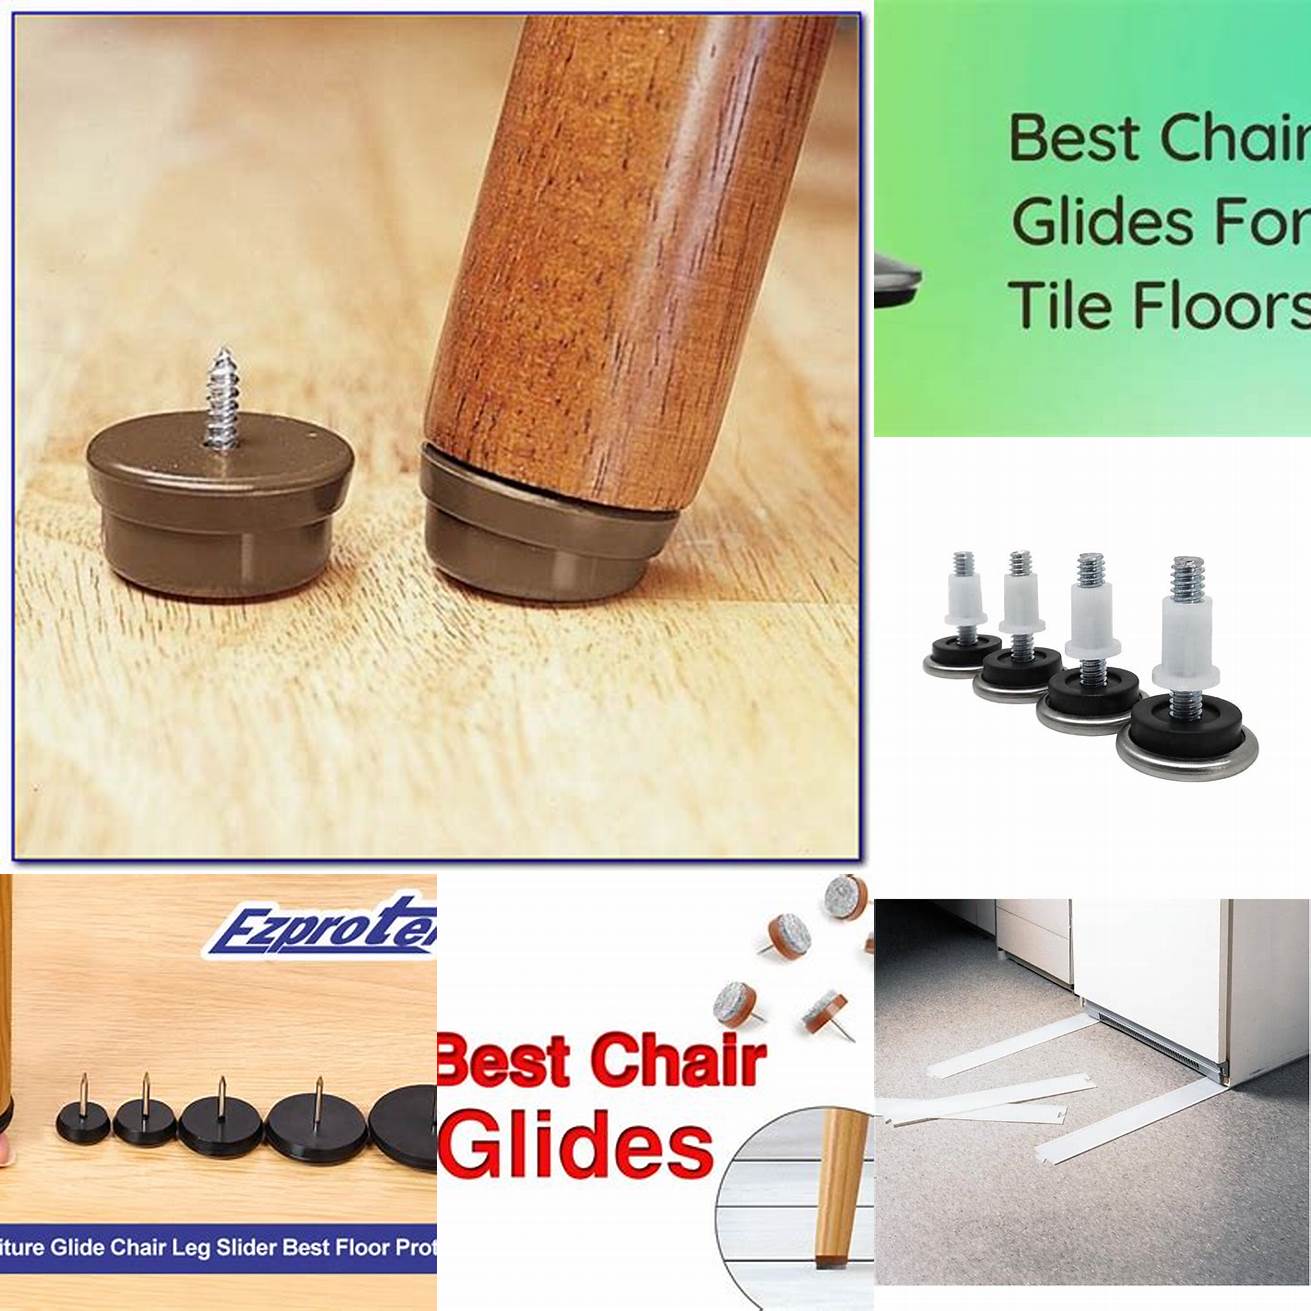 1 Choose the right type of glide for your floor type